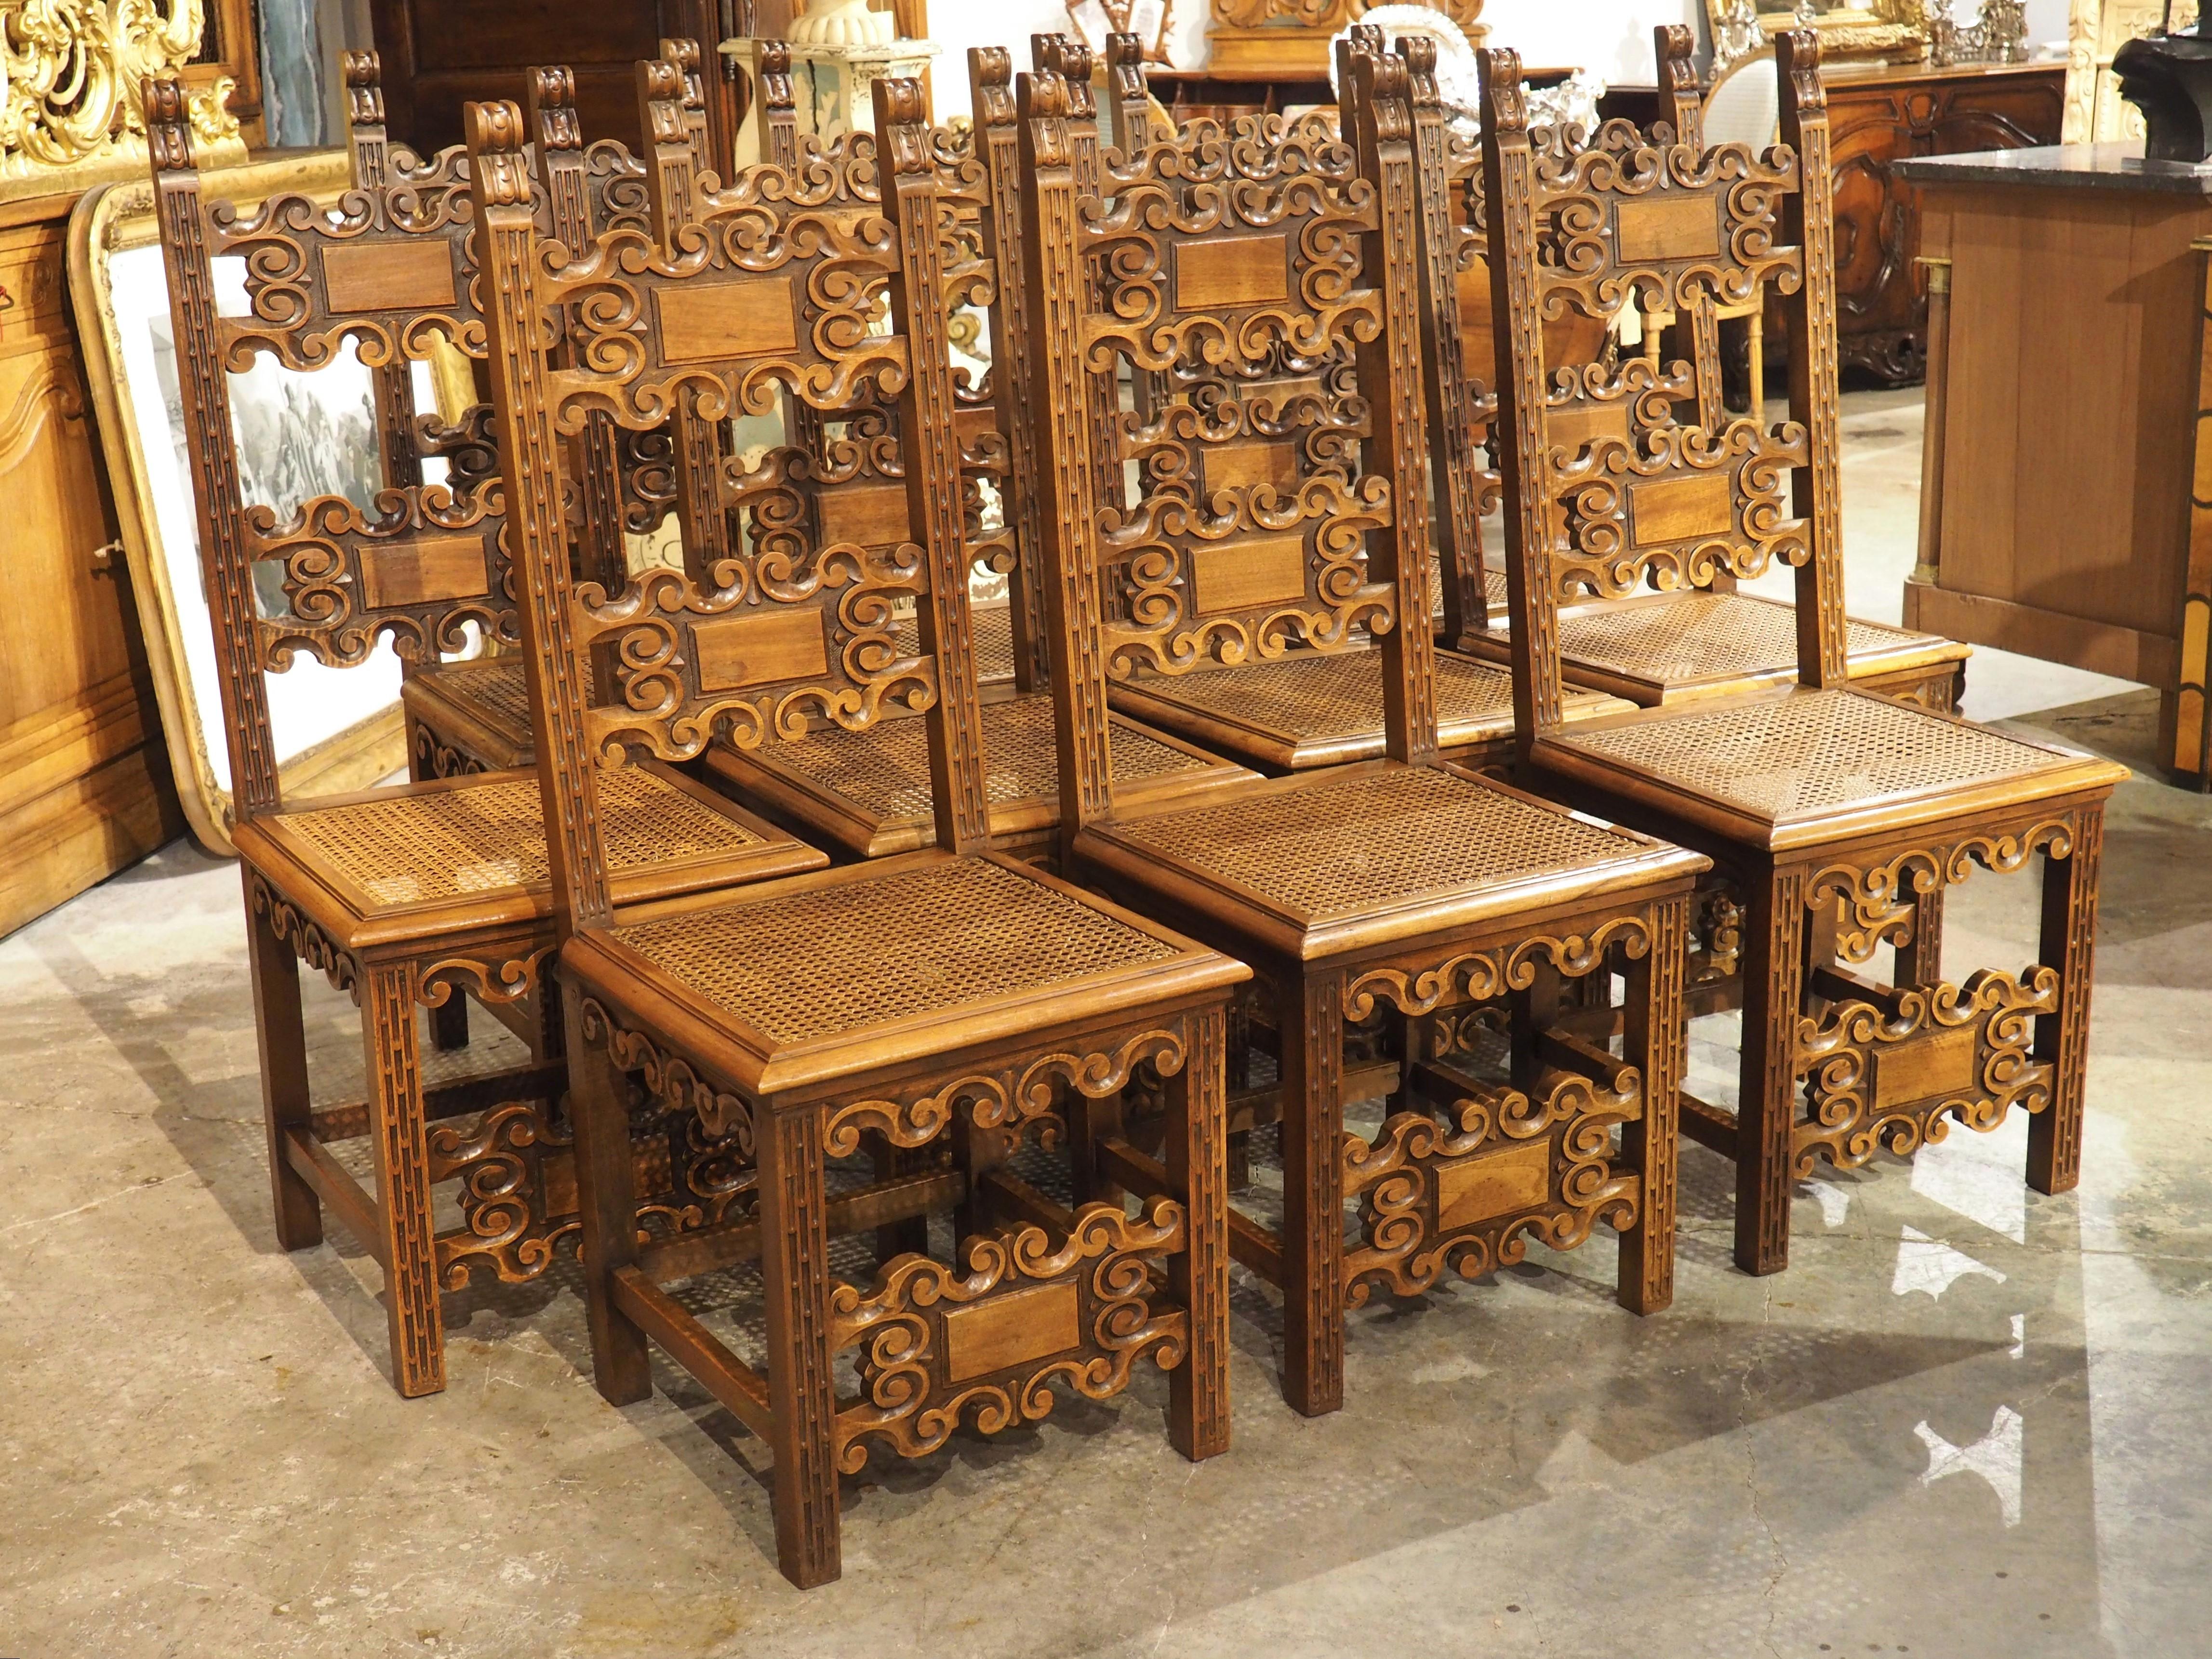 Caning Set of 10 Antique Italian Carved Walnut and Caned Dining Chairs, Circa 1880 For Sale